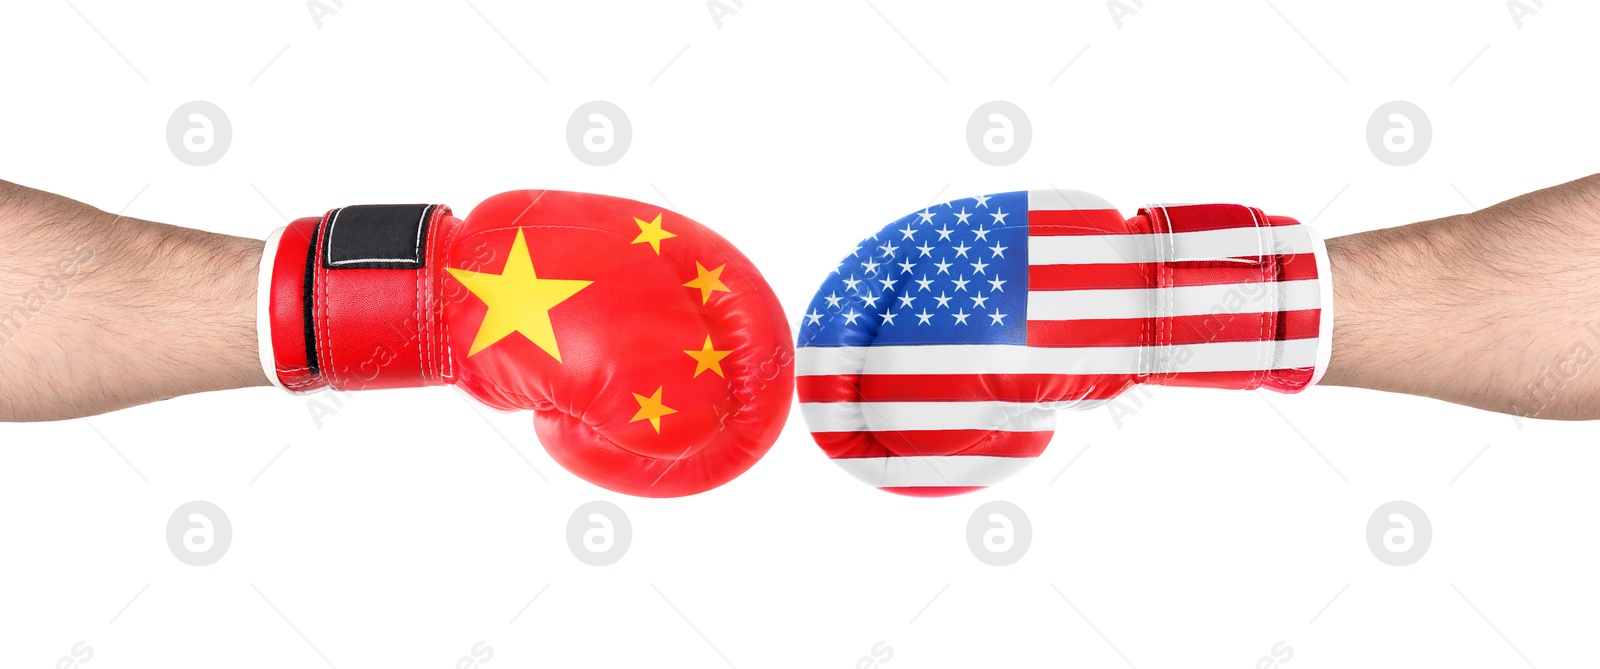 Image of Political conflict. Men in boxing gloves with flags of USA and China fighting on white background, closeup